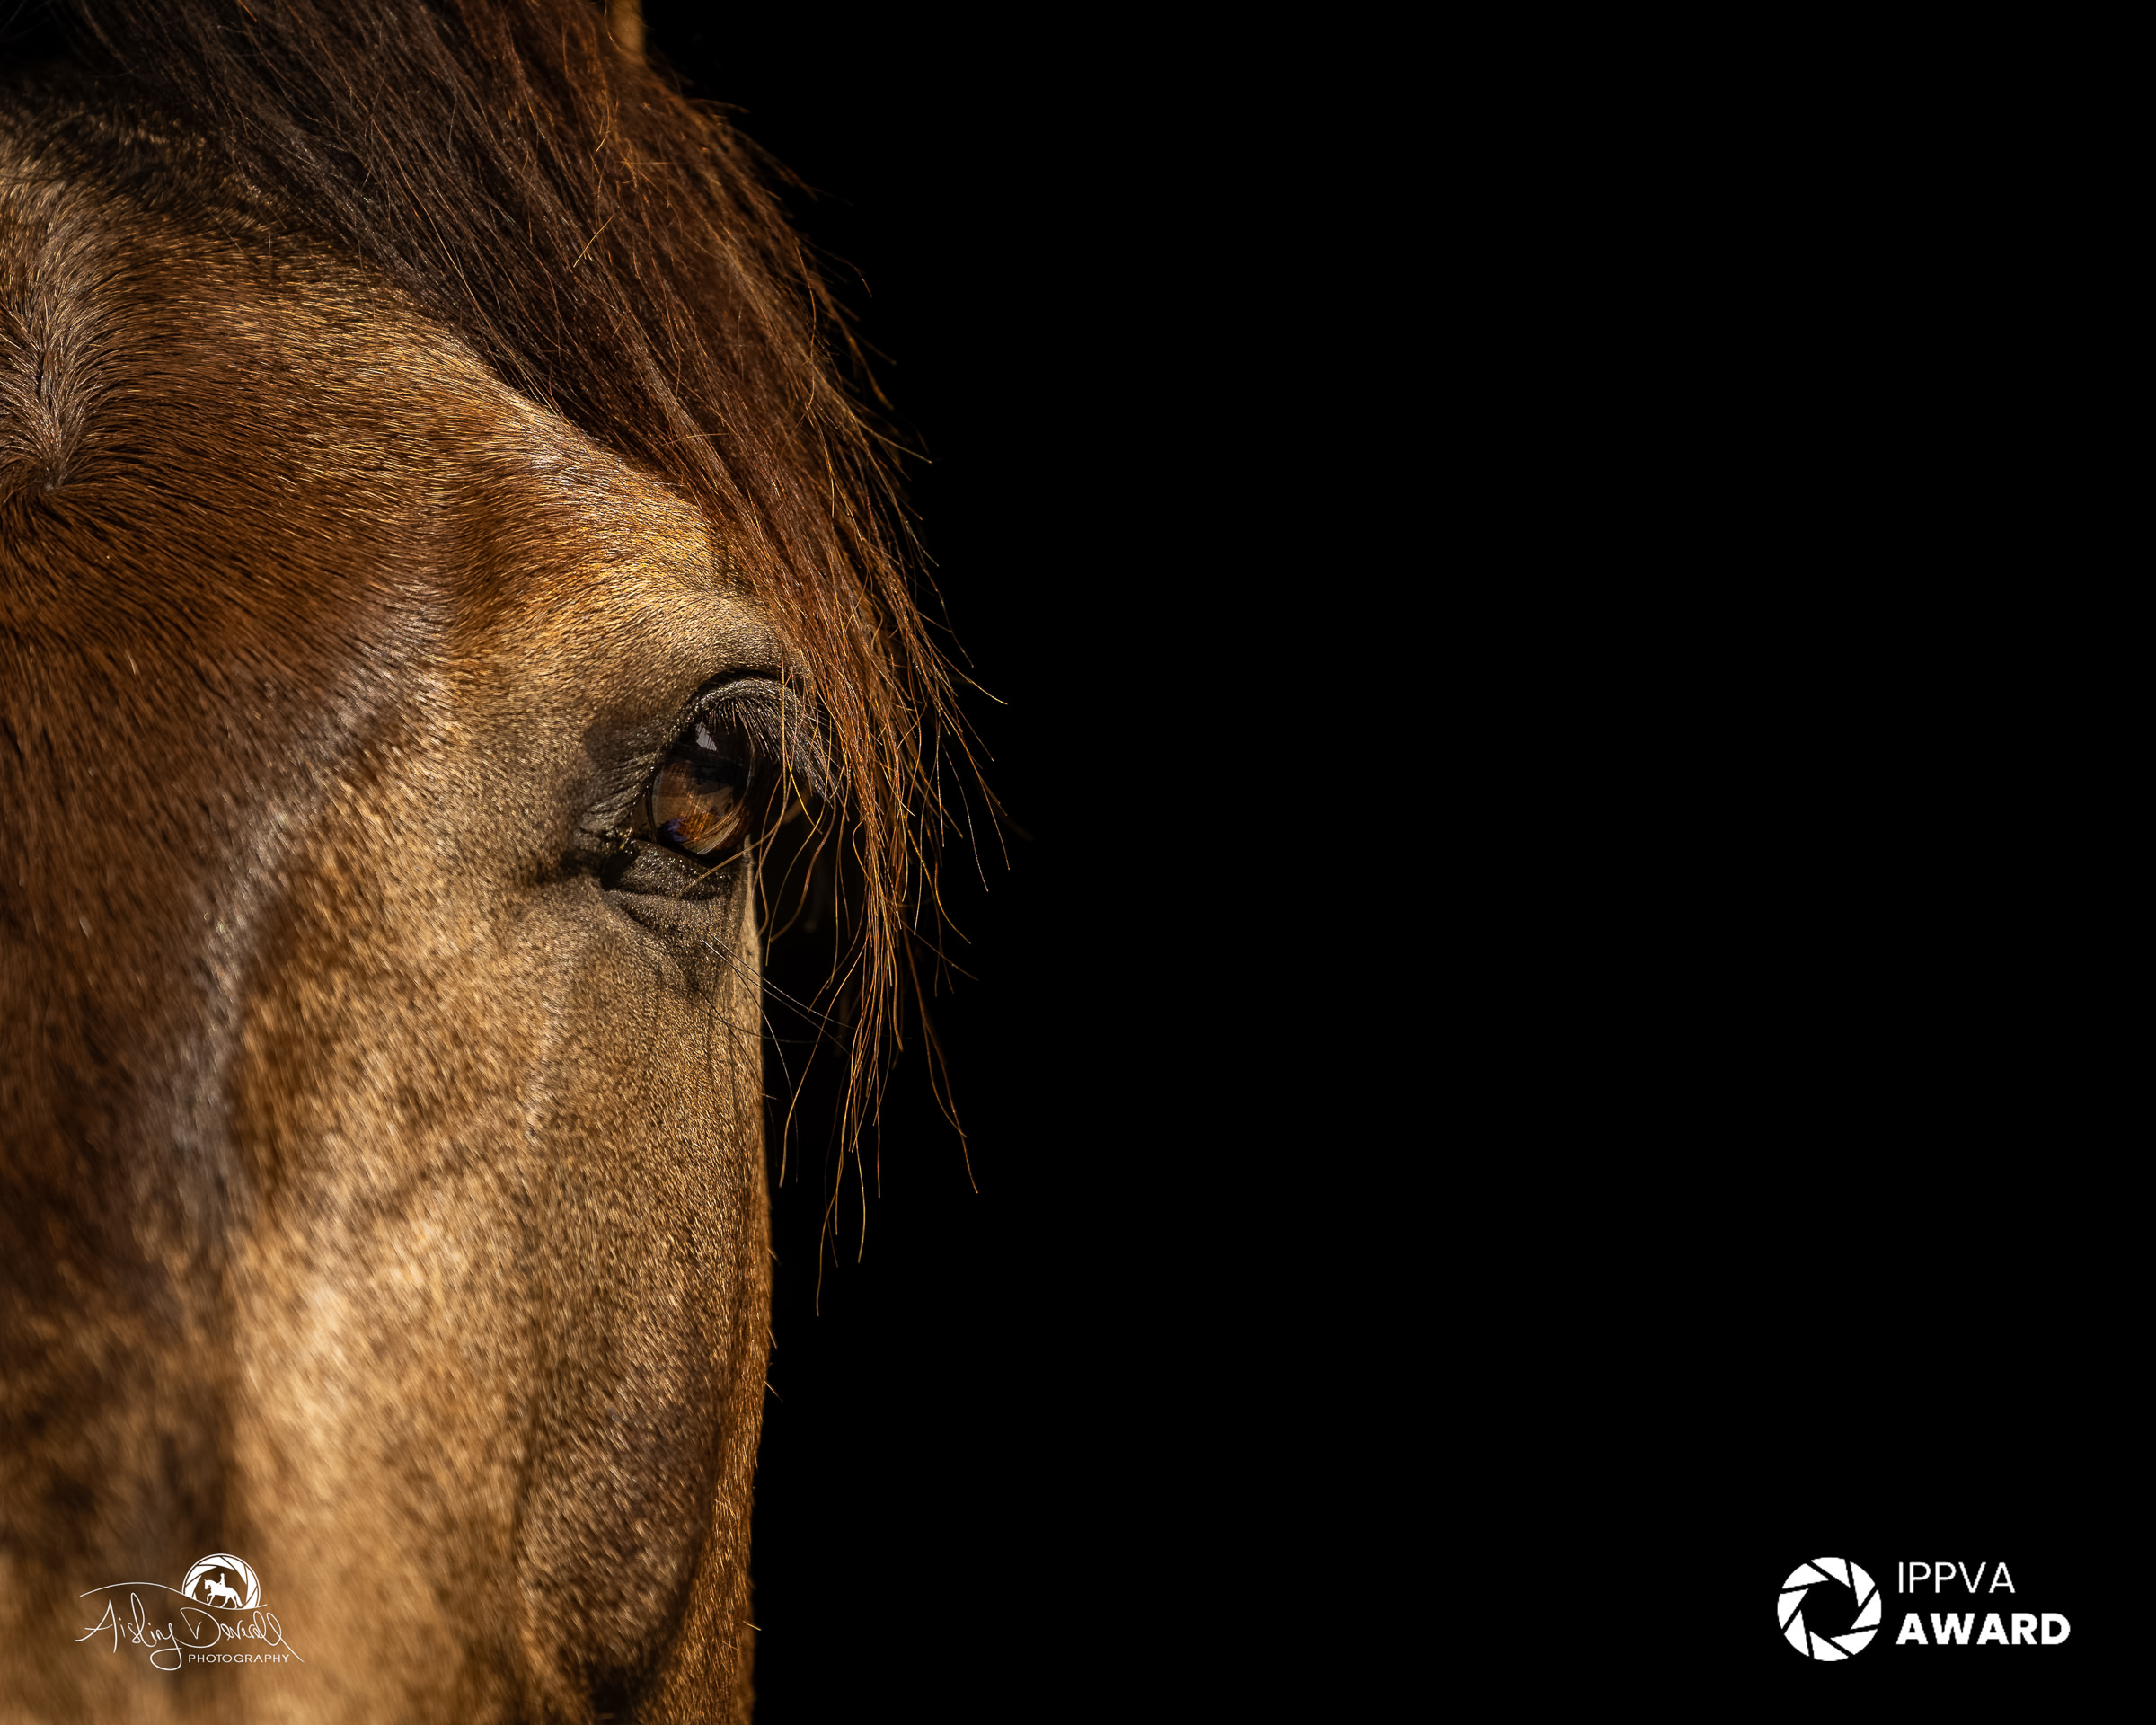 IPPVA award winning image of a horse head up close with black background